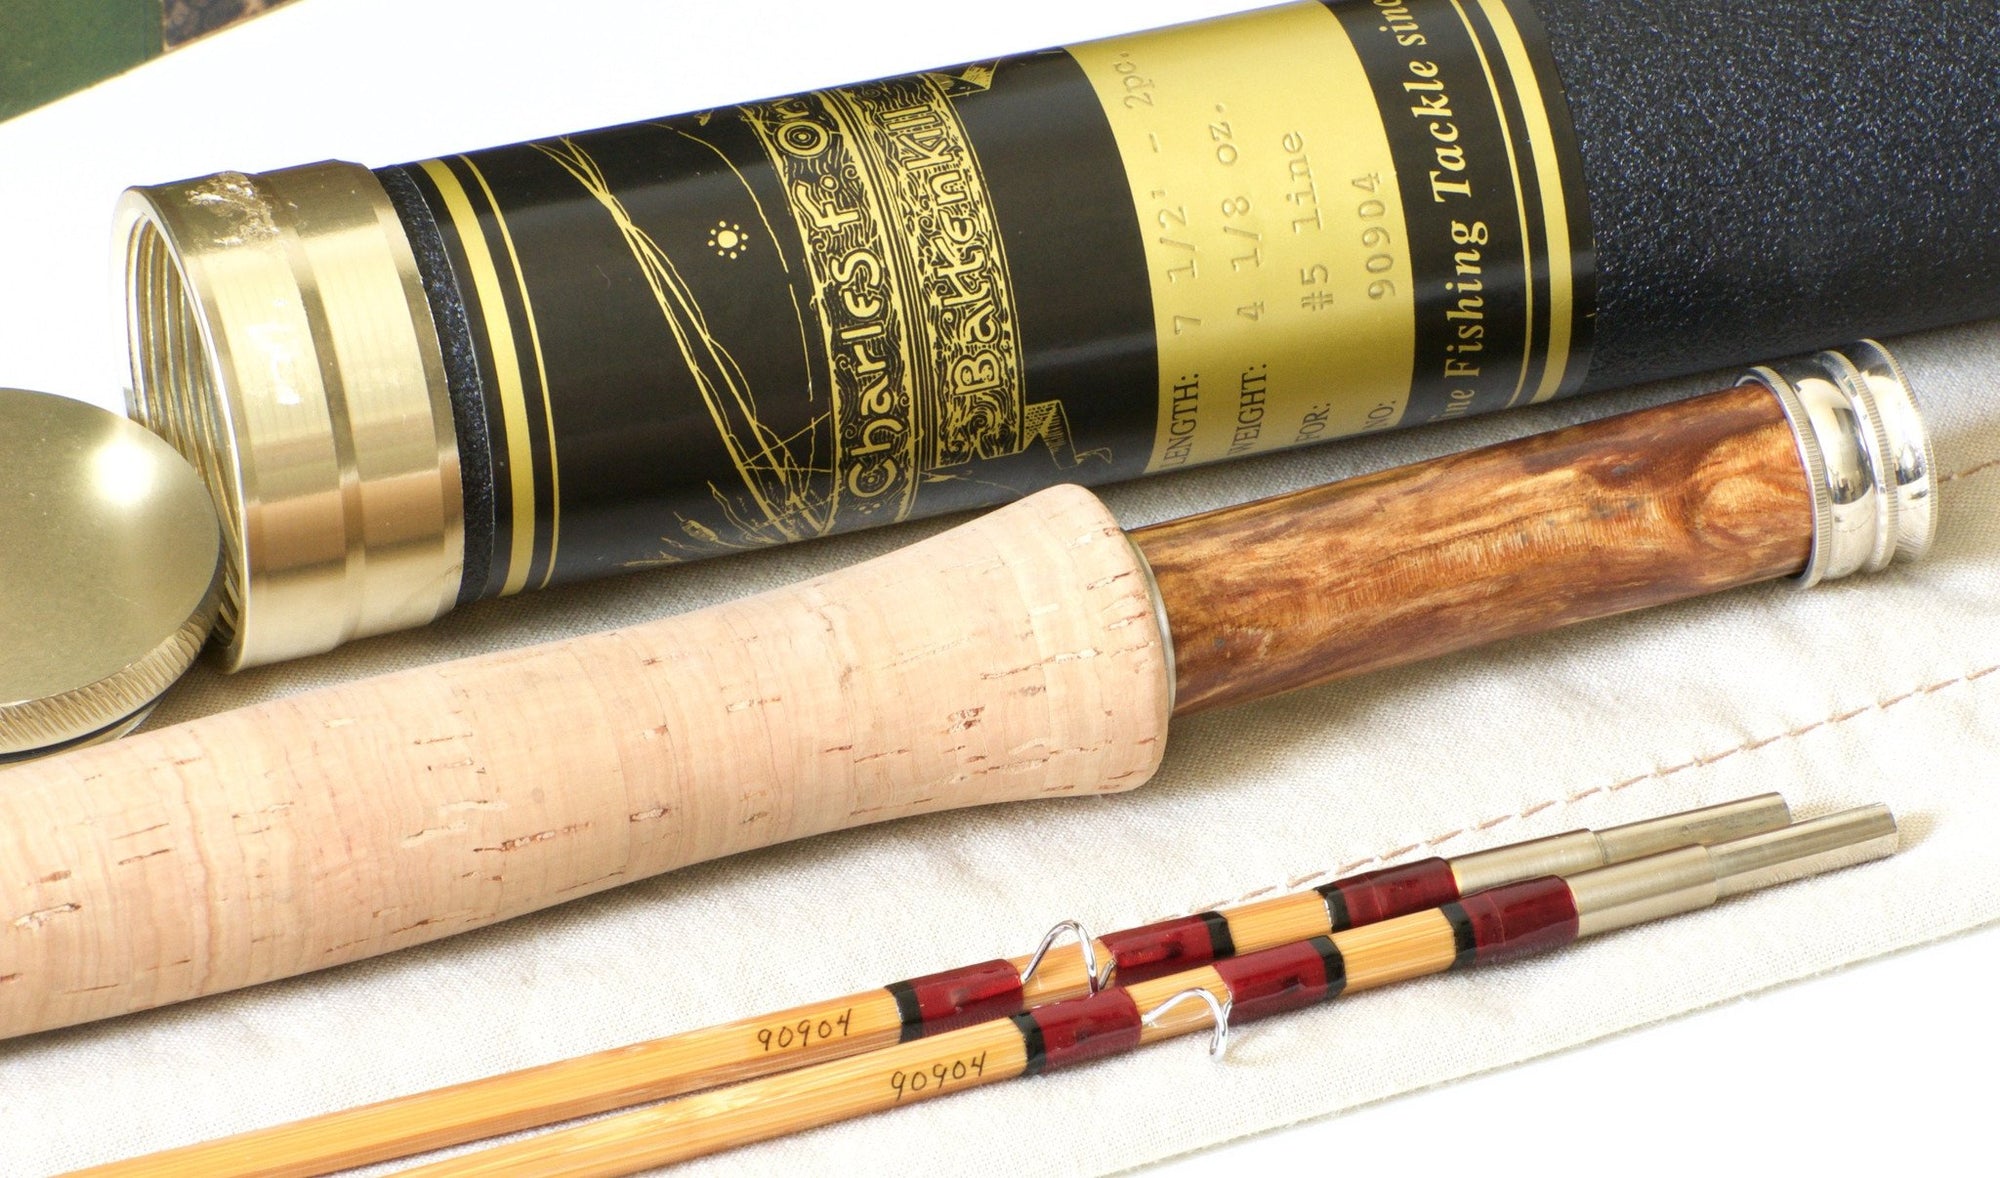 sold ORVIS “SHOOTING STAR” 9’6” BAMBOO FLY ROD